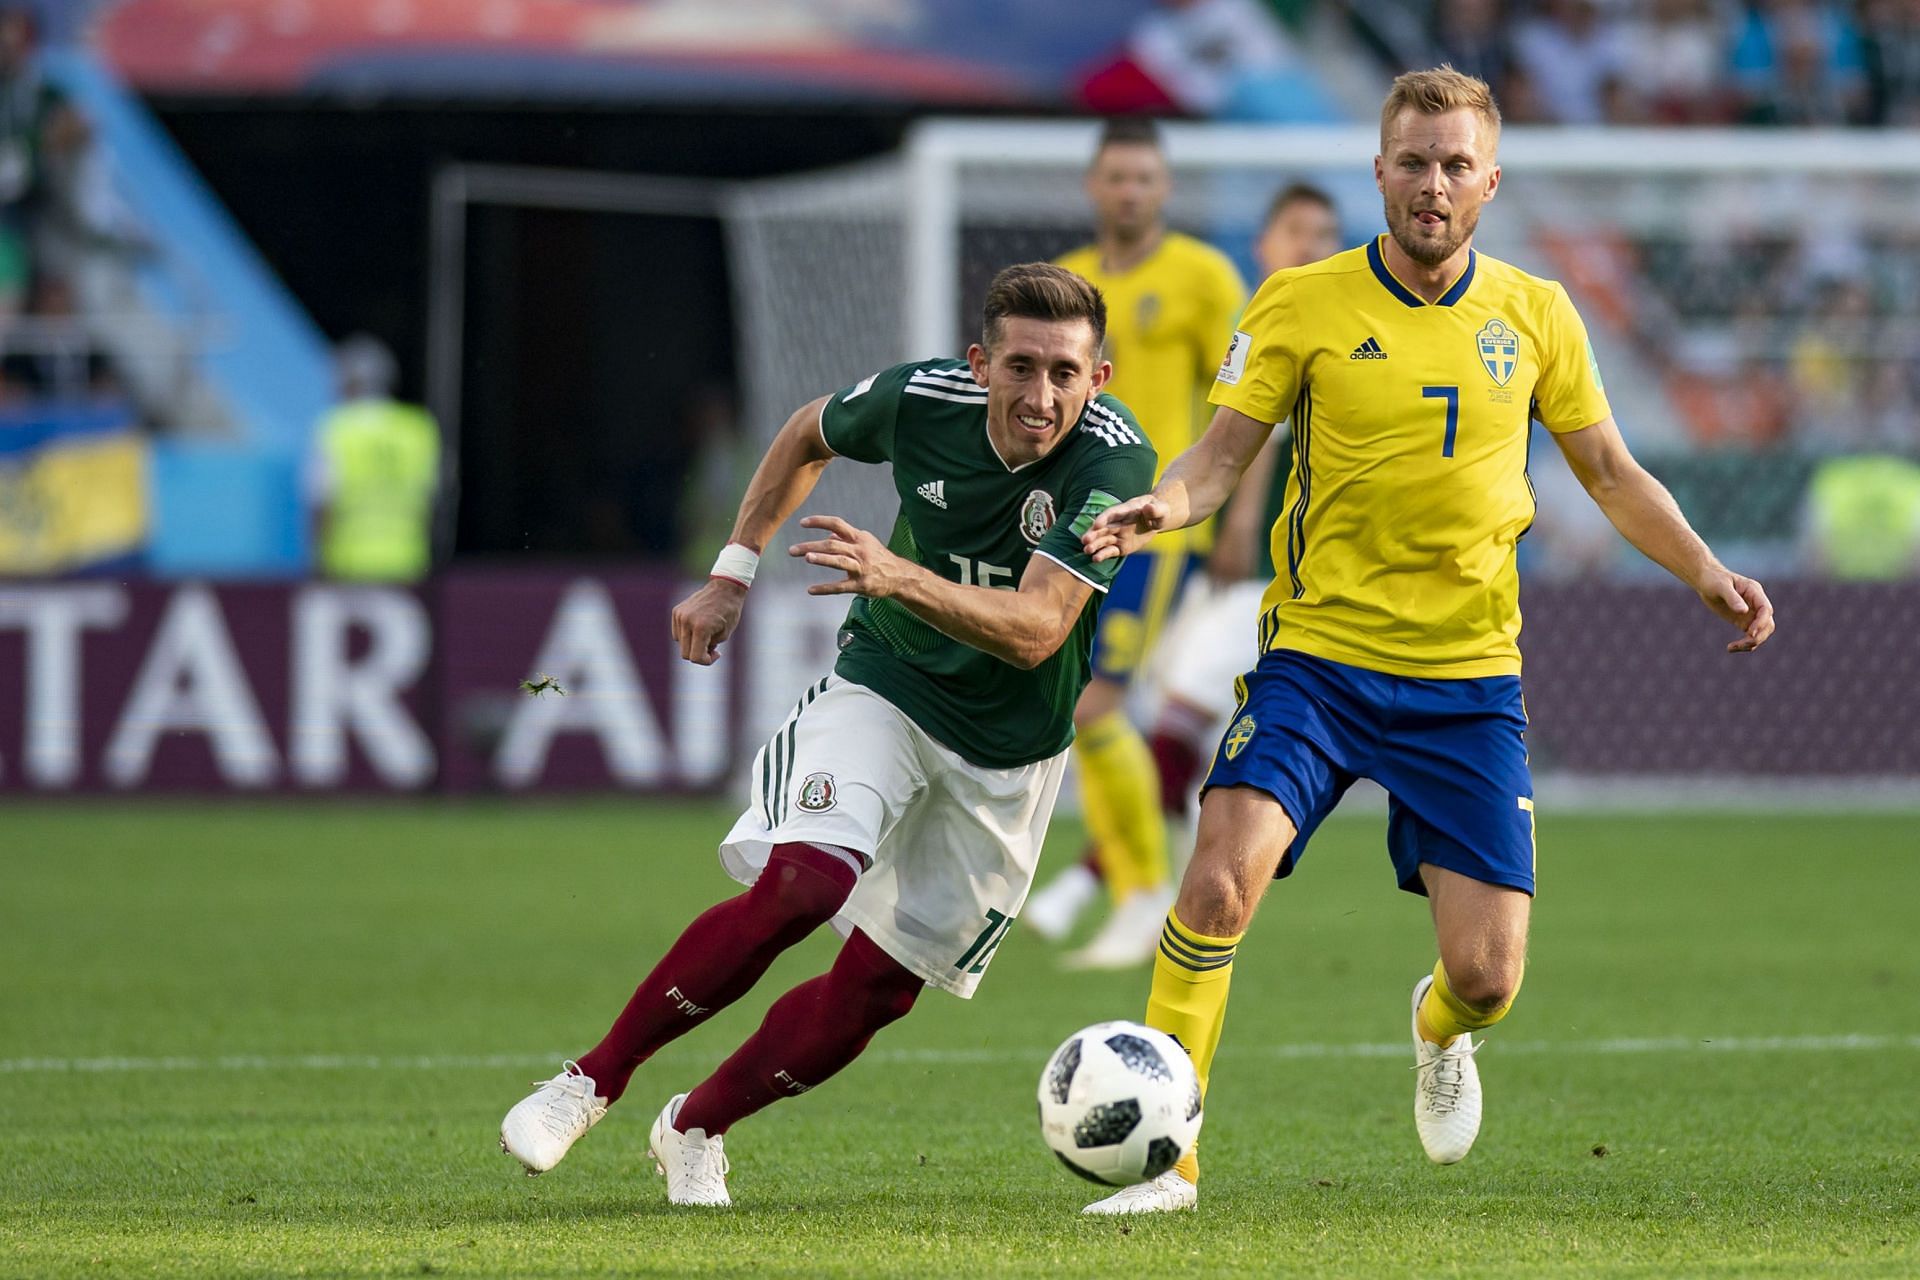 Mexico and Sweden will square off in a friendly game on Wednesday